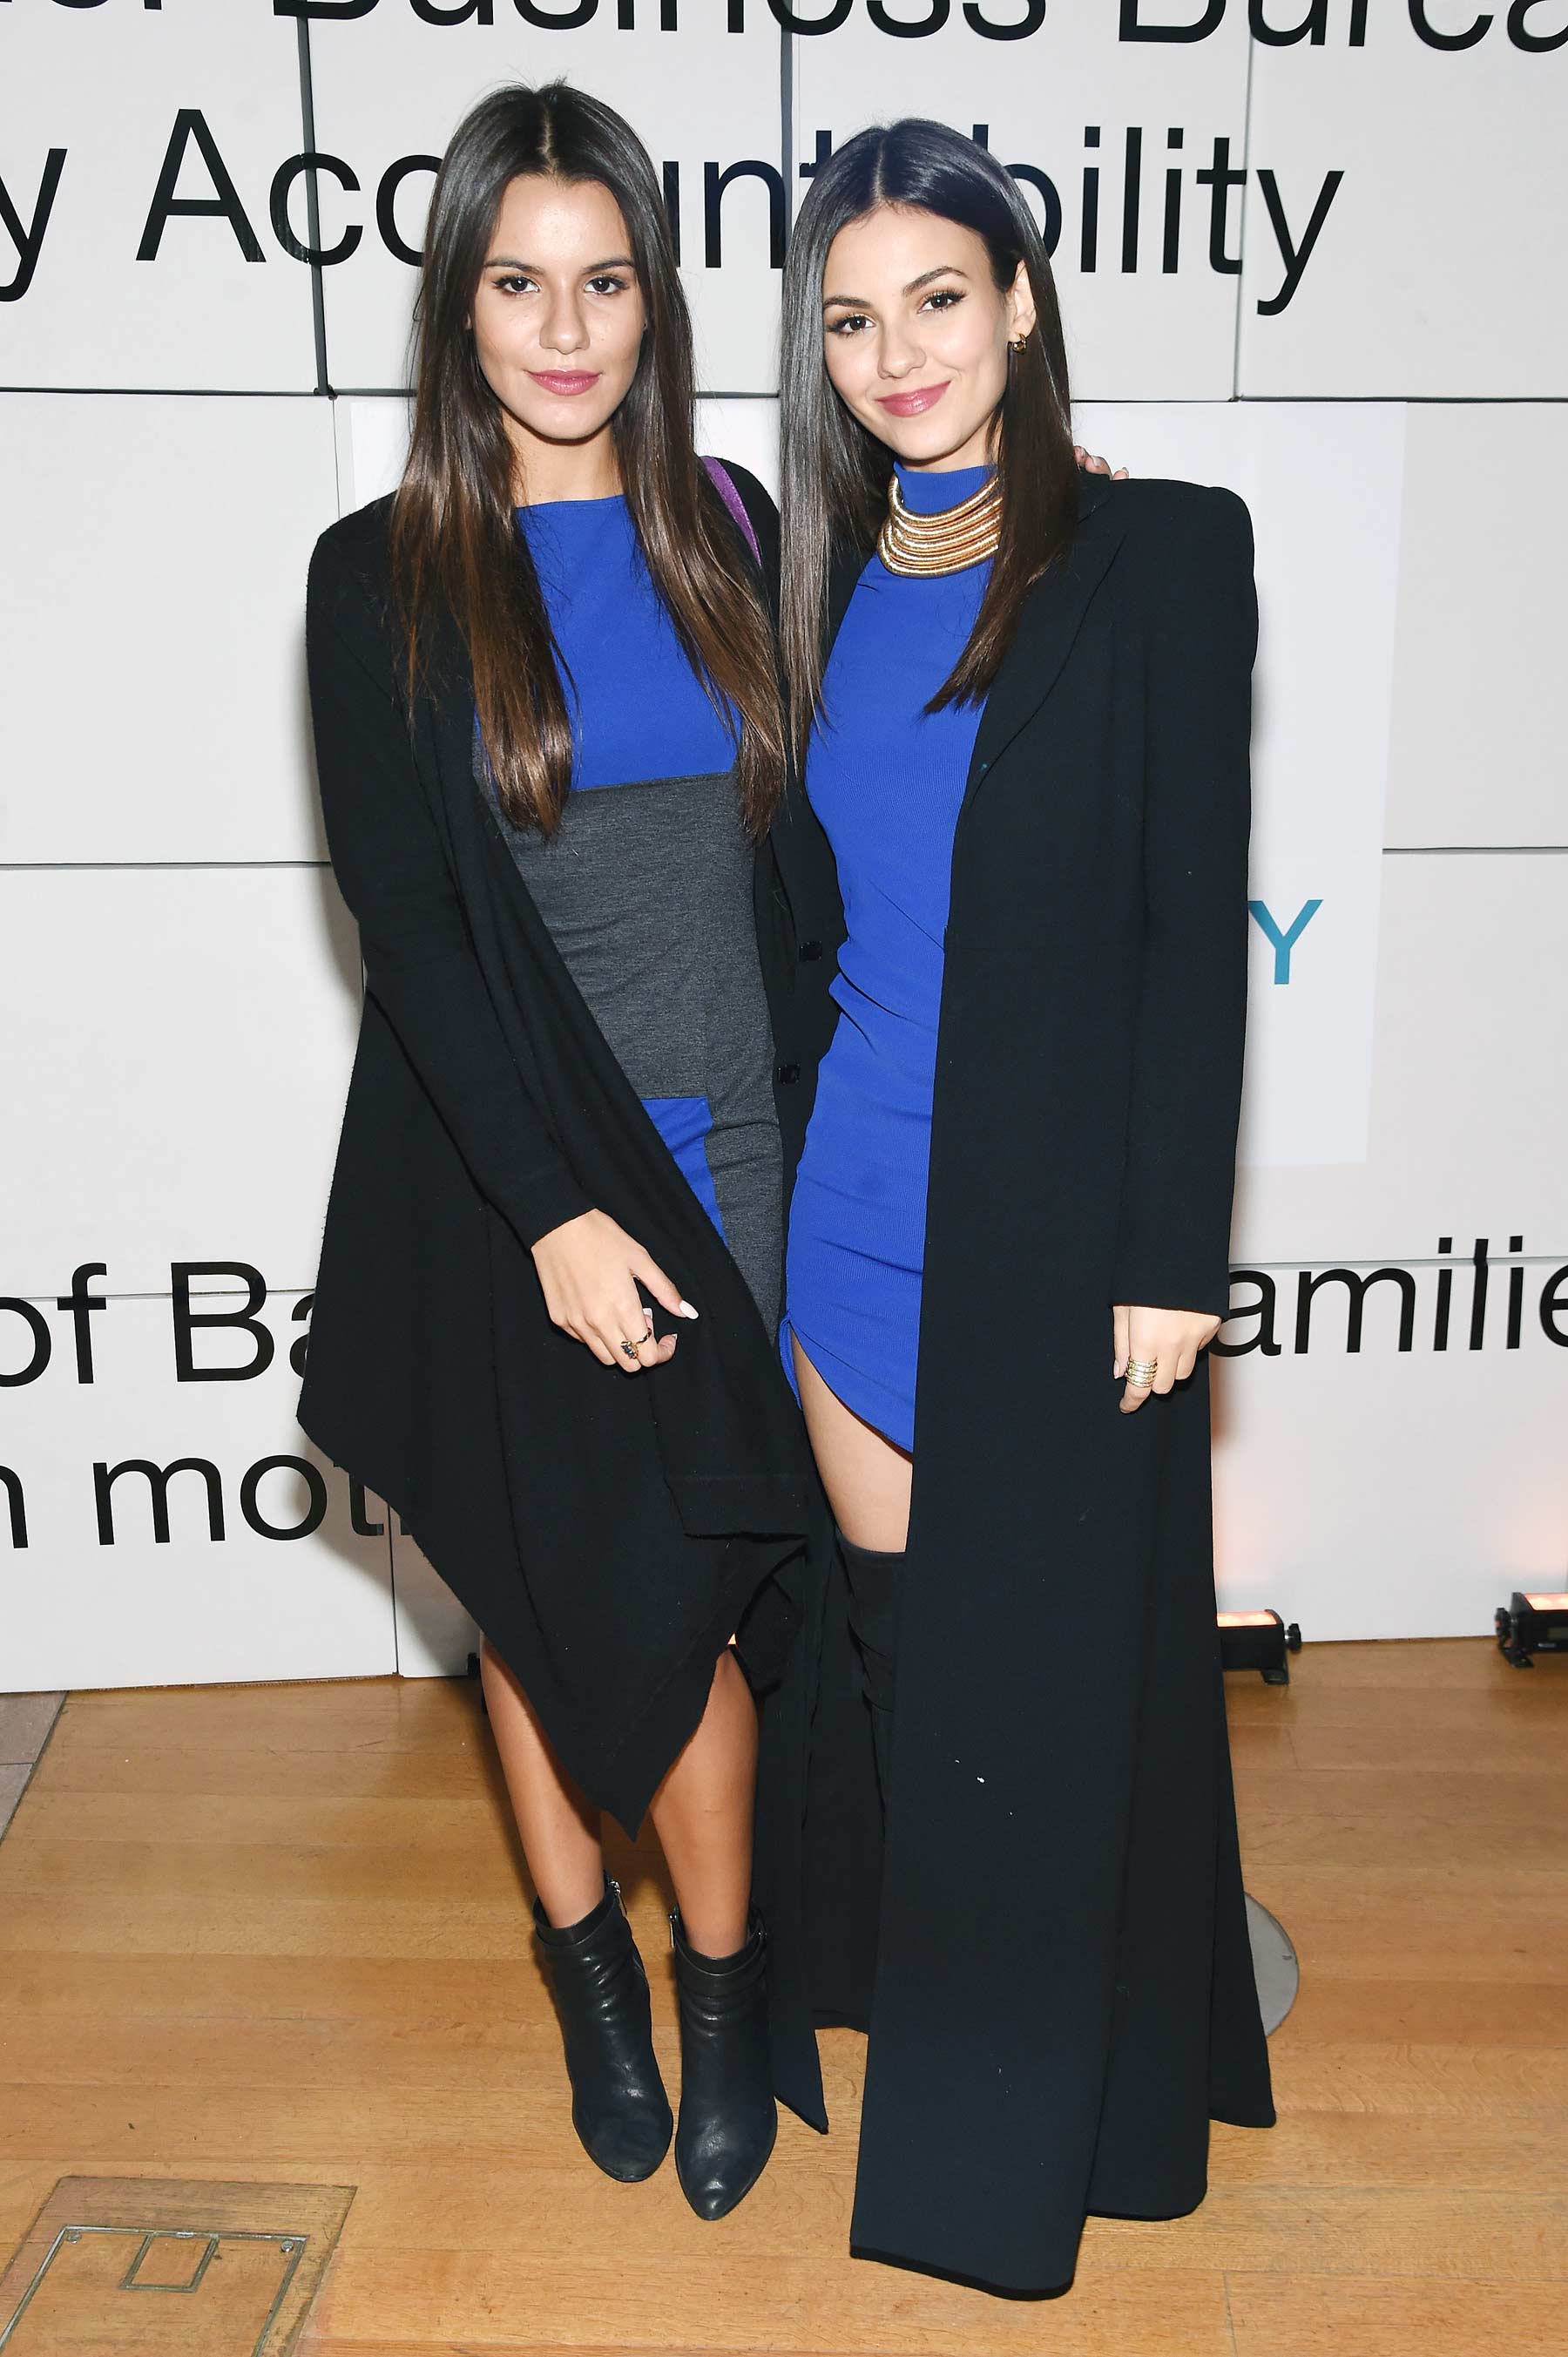 Victoria Justice attends An Evening with Jerry Seinfeld and Amy Schumer